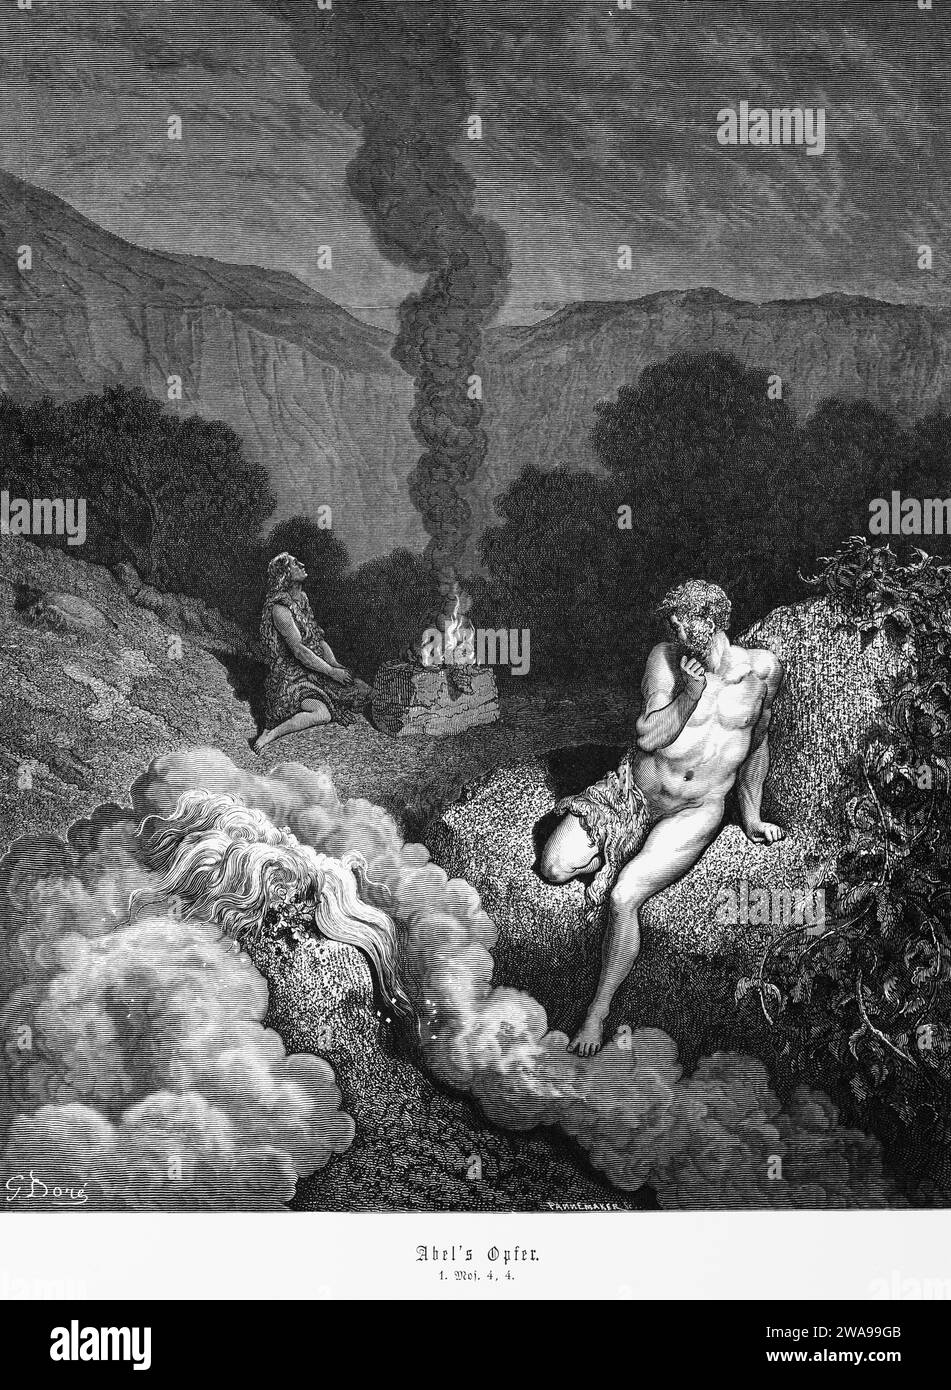 Bible, Abel's sacrifice, Genesis 4, Moses, Old Testament, mountain landscape, brothers Cain and Abel, firstlings, sacrificing lambs, fire, smoke, hist Stock Photo